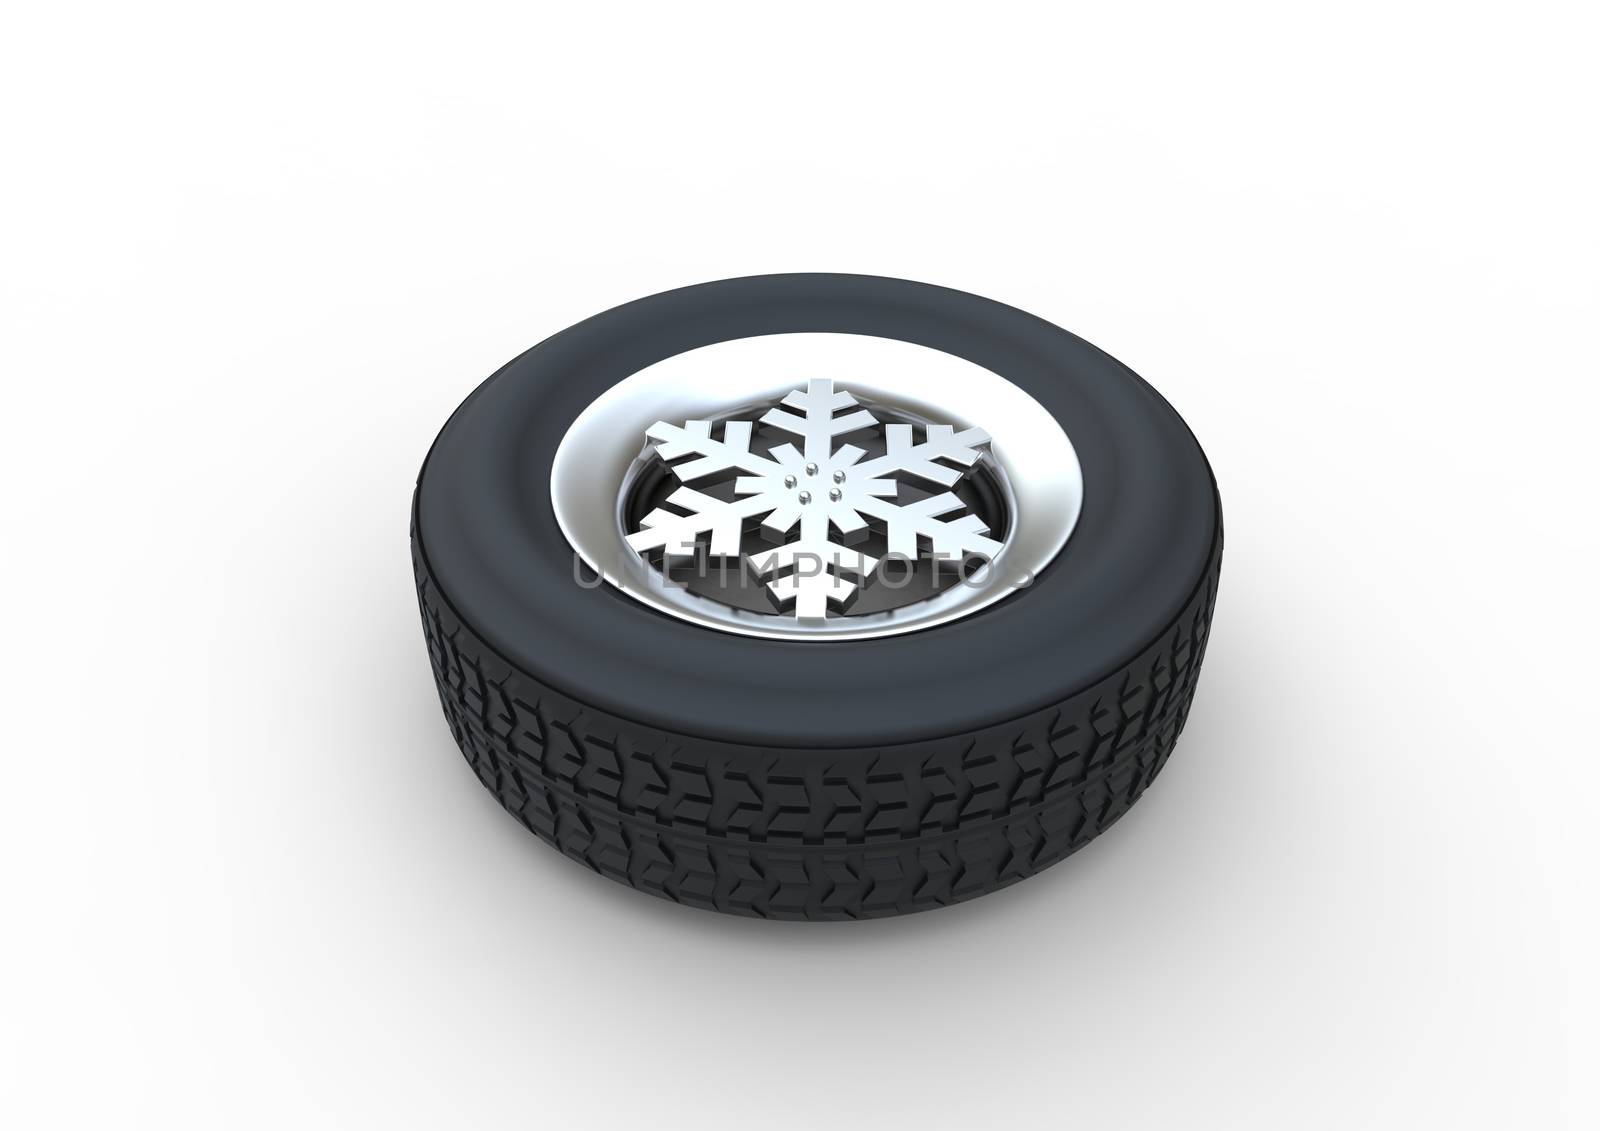 Set of winter tires with the rim of snowflake shape isolated on white background 3d illustration